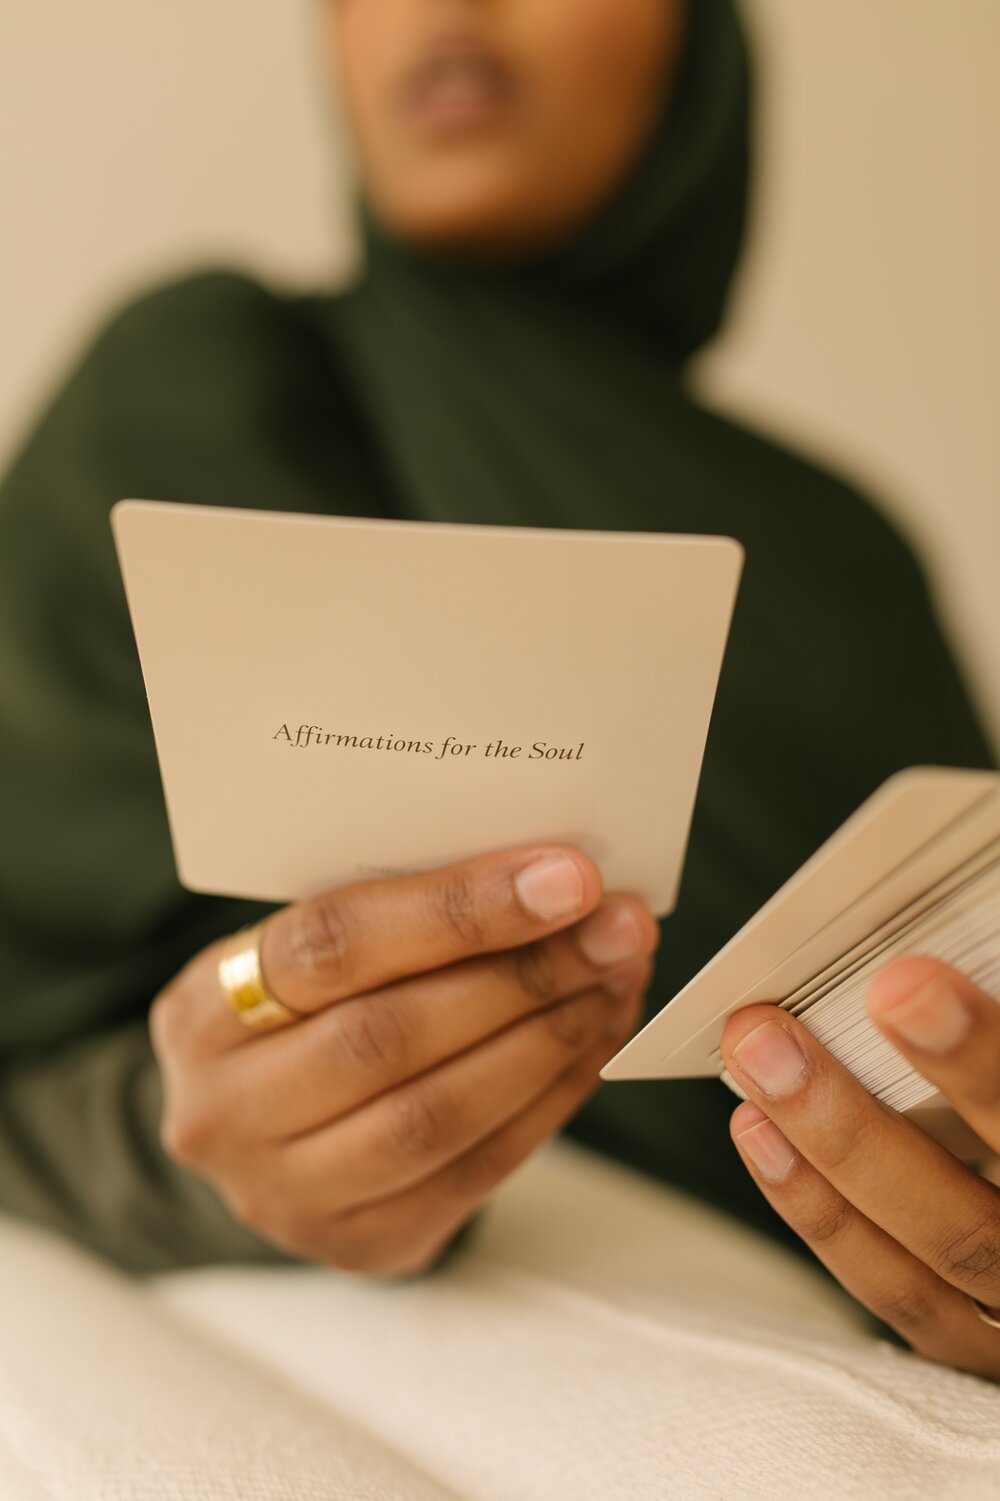 A muslim woman holding a card from Chinutay & Co's Affirmations for the Soul.